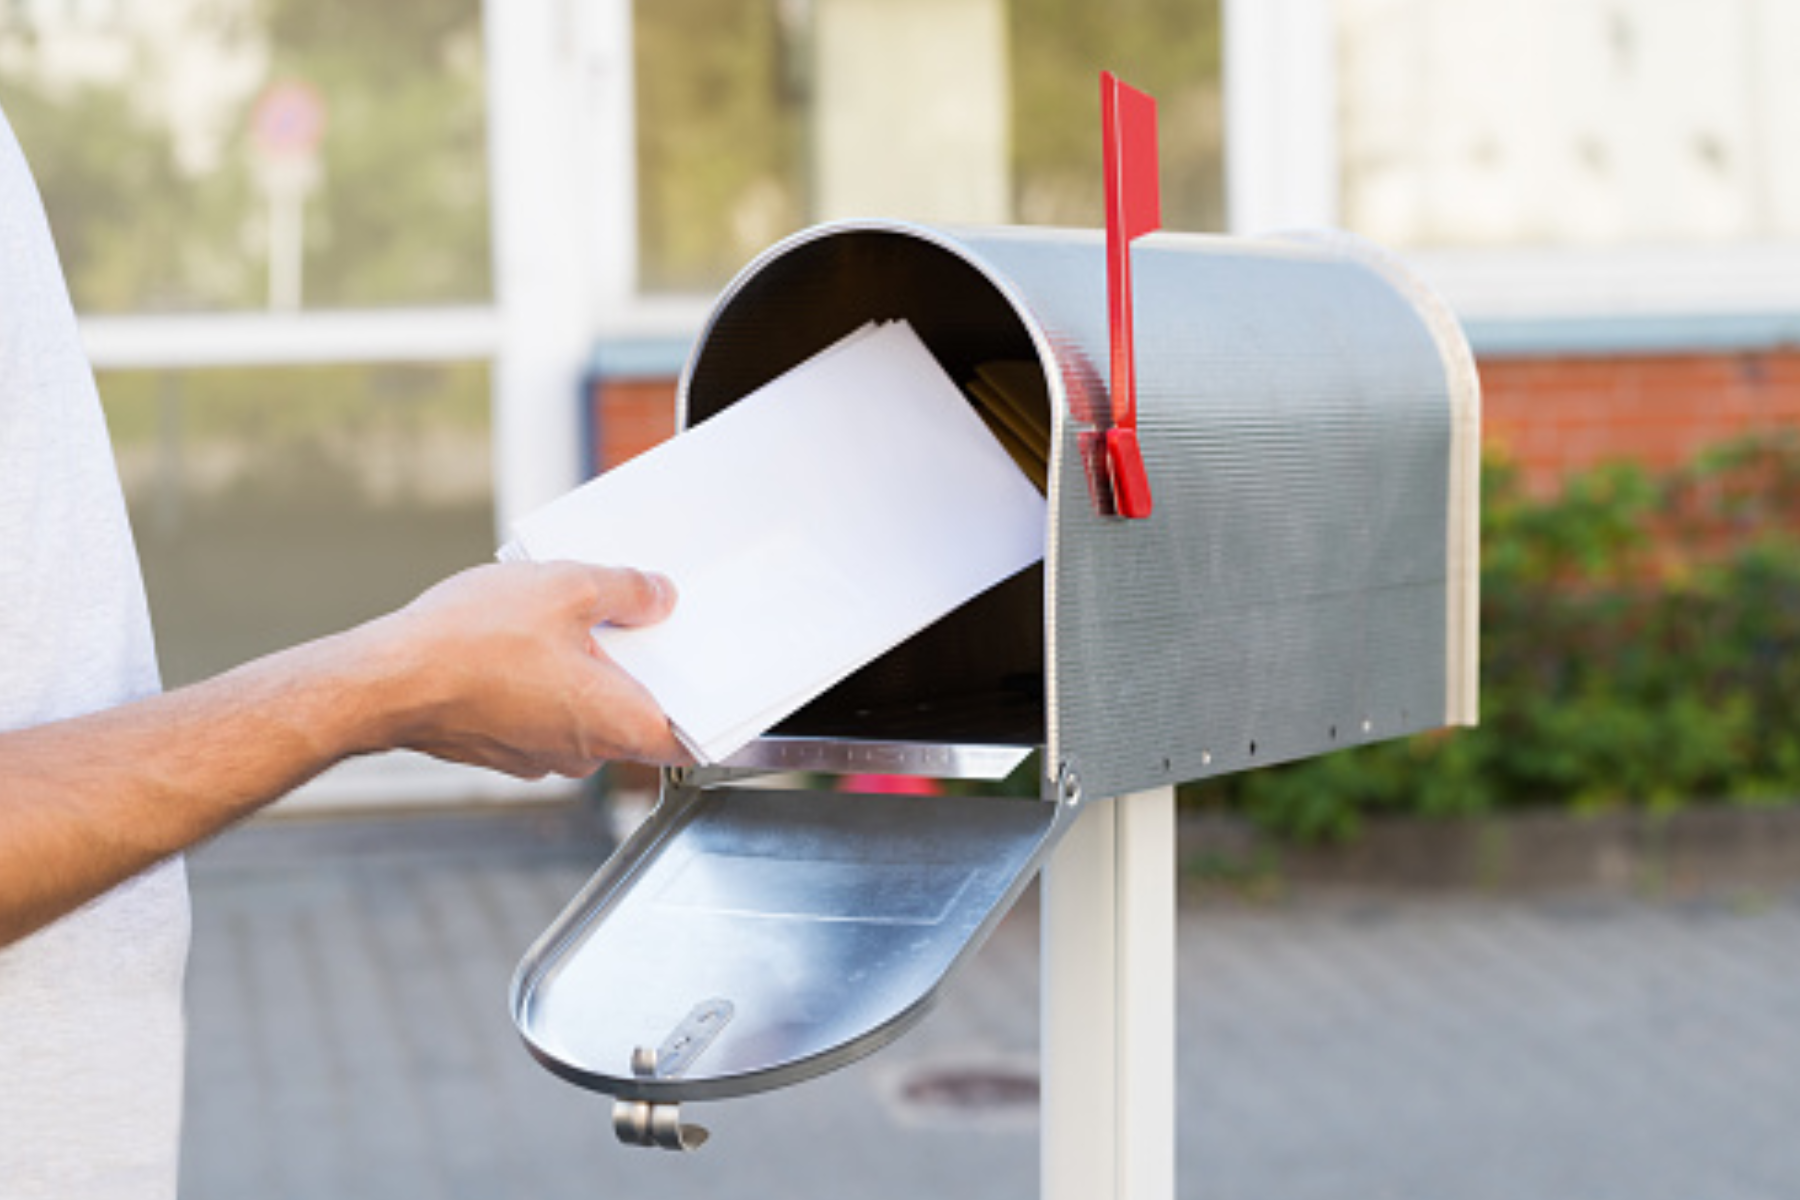 A man puts a letter in a mail box